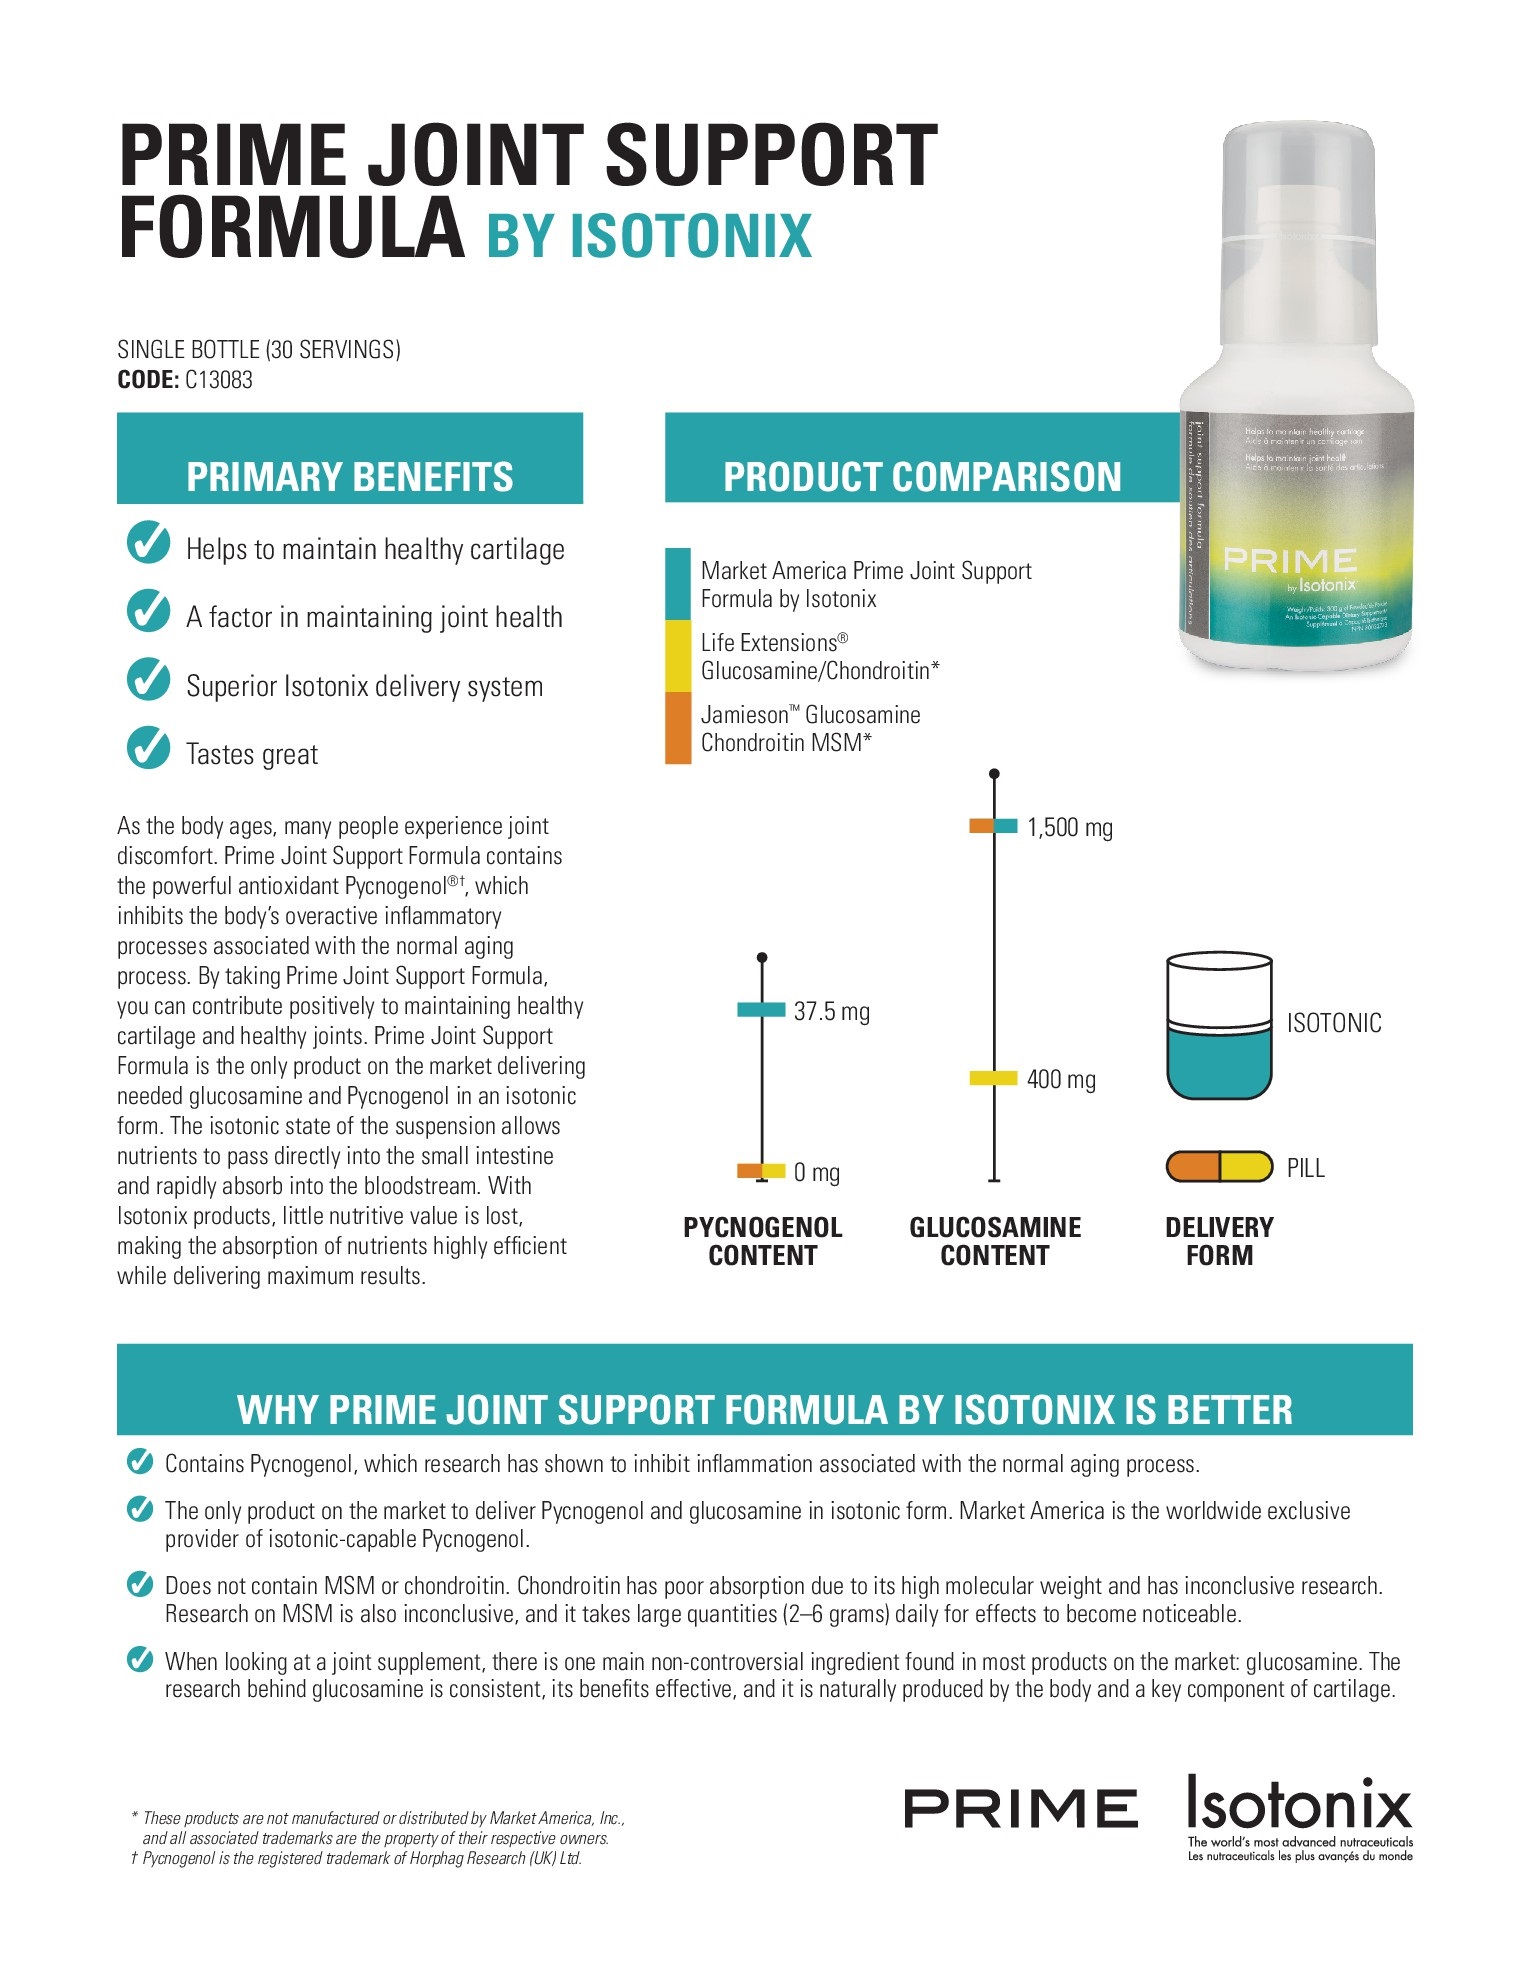 Why Prime Joint Support Formula by Isotonix is the best!